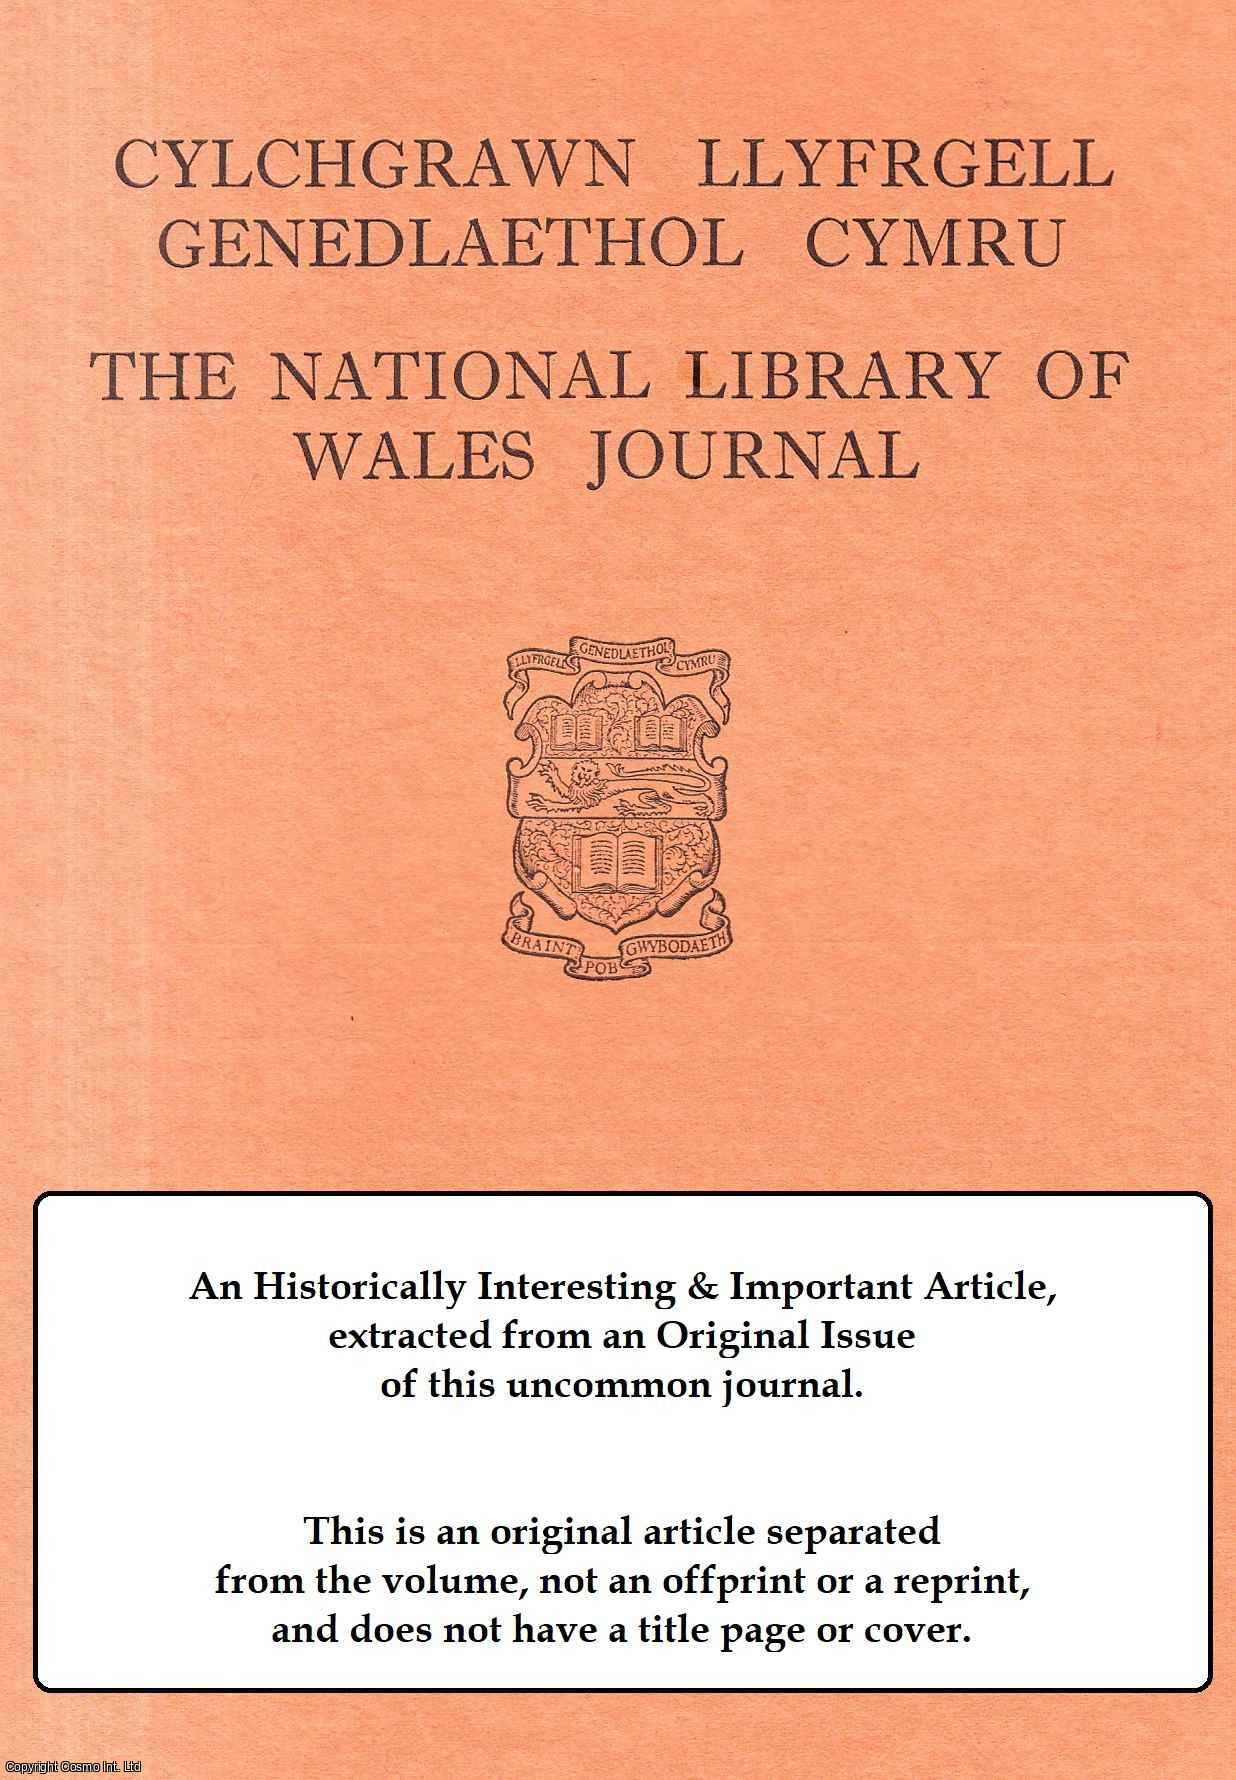 --- - Pethau Nas Cyhoeddwyd. An original article from The National Library of Wales Journal, 1945.